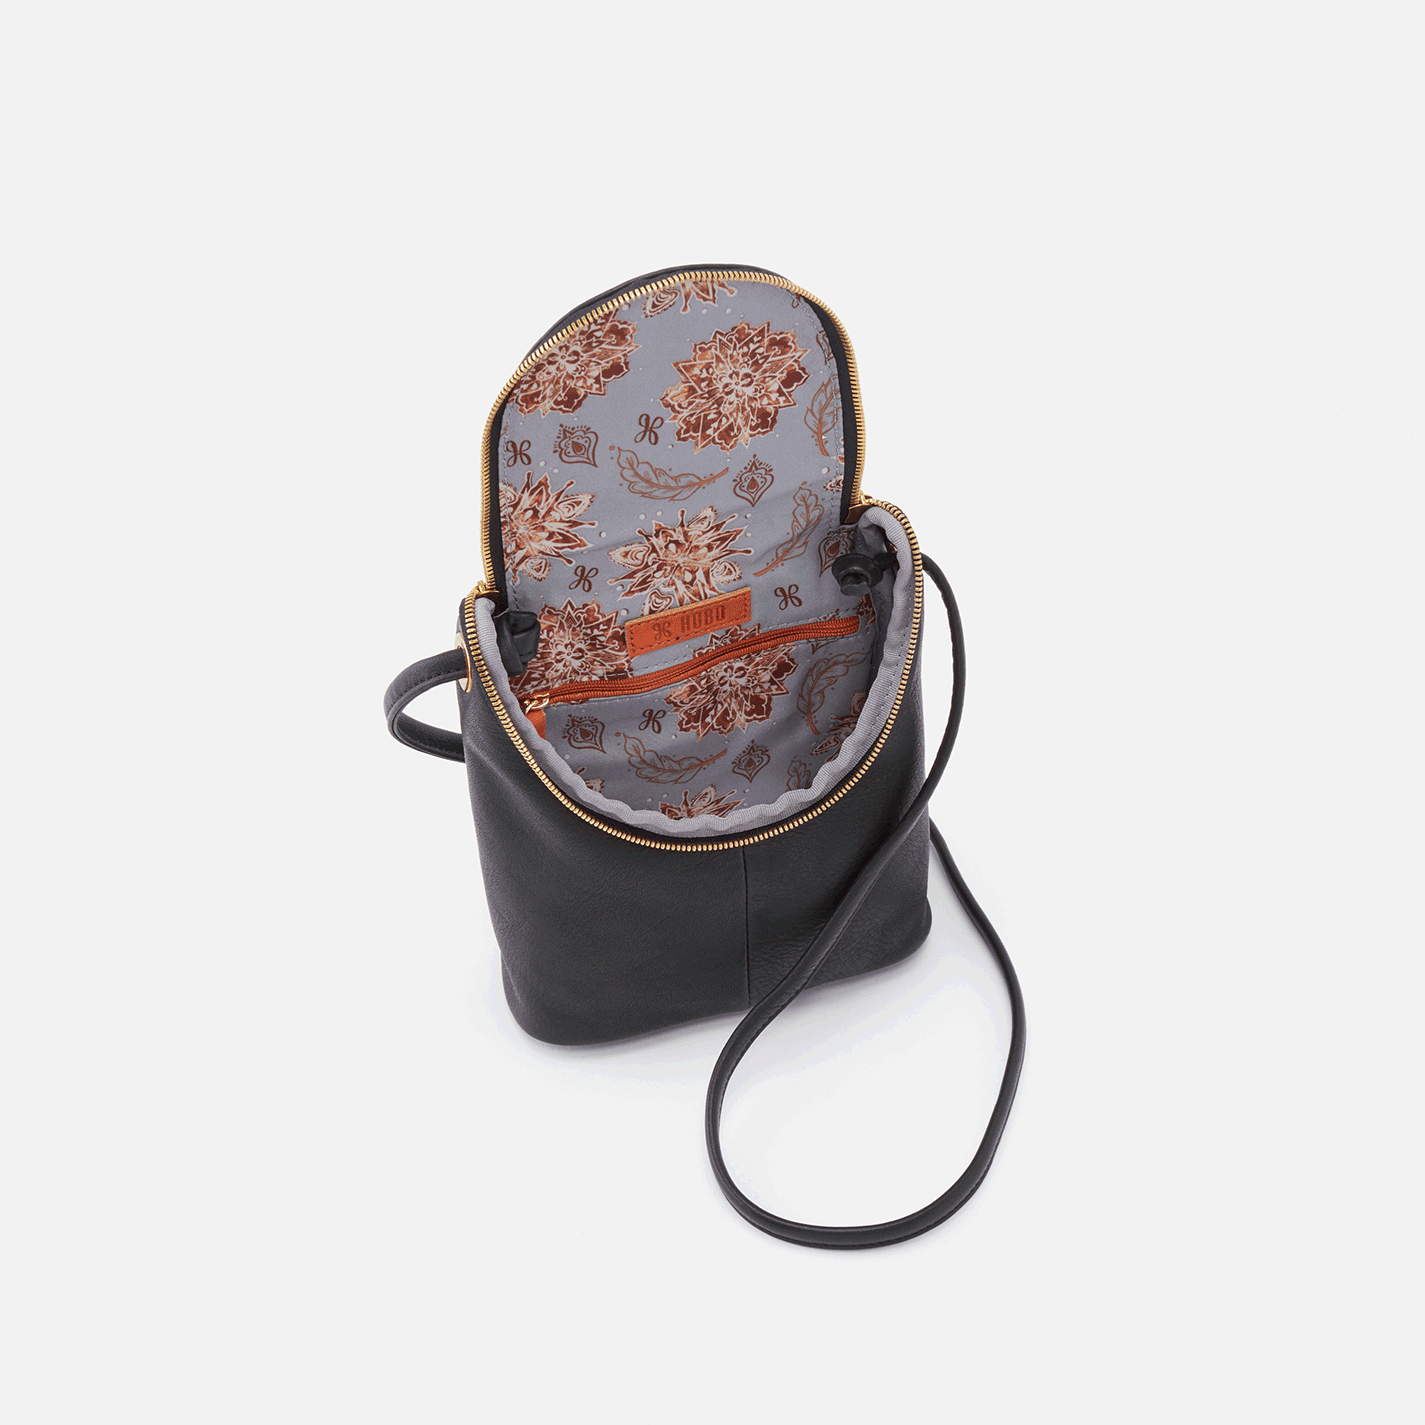 Hobo Fern Crossbody Black, exterior wall pocket, interior zip pocket, 26" Strap, 6" W x 7.5" H x 2" D drop. Available at The Painted Cottage in Edgewater, MD